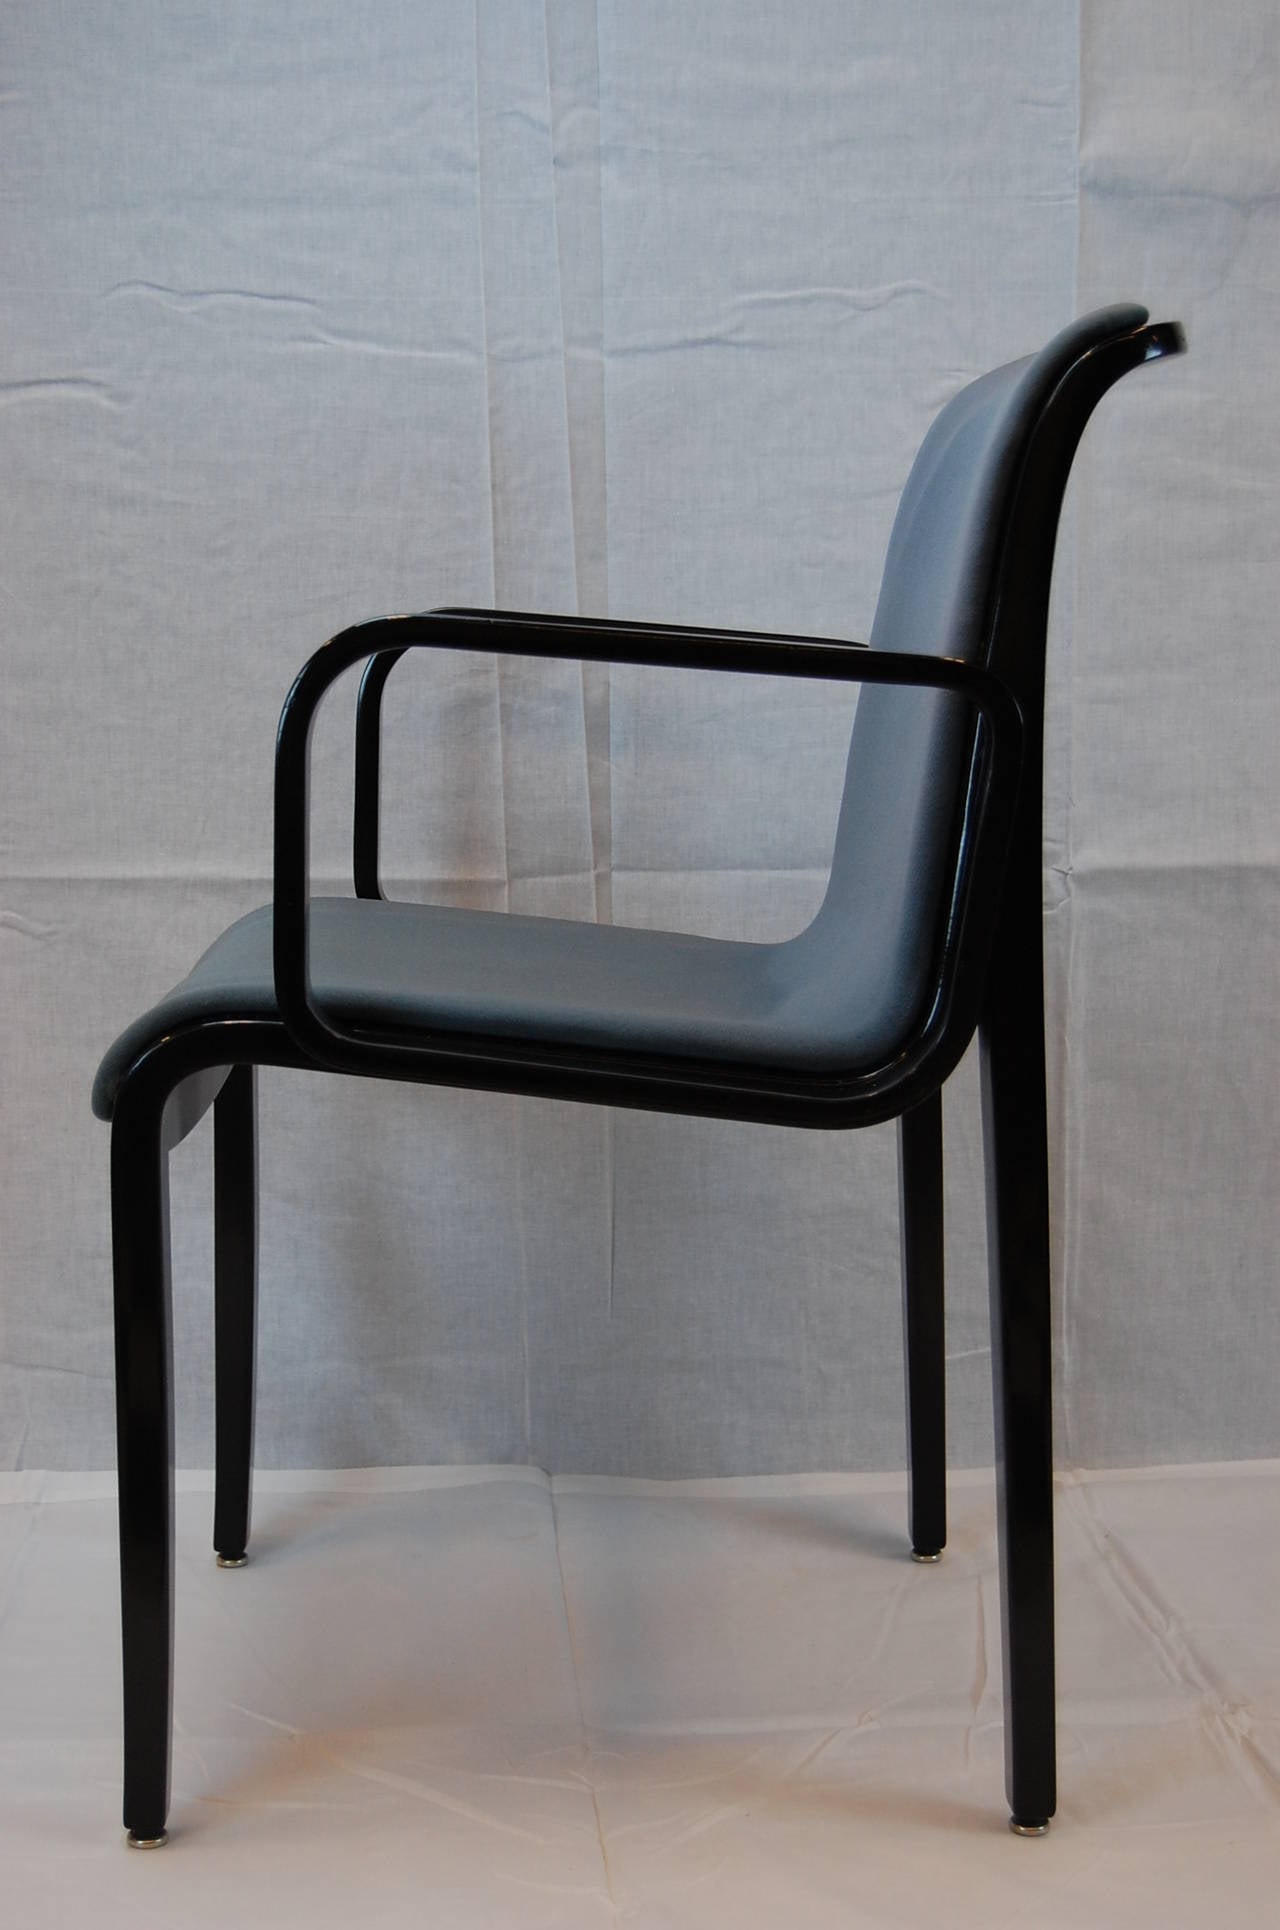 Black Lacquered Armchair by Bill Stephens, for Knoll Furniture In Excellent Condition For Sale In Pittsburgh, PA